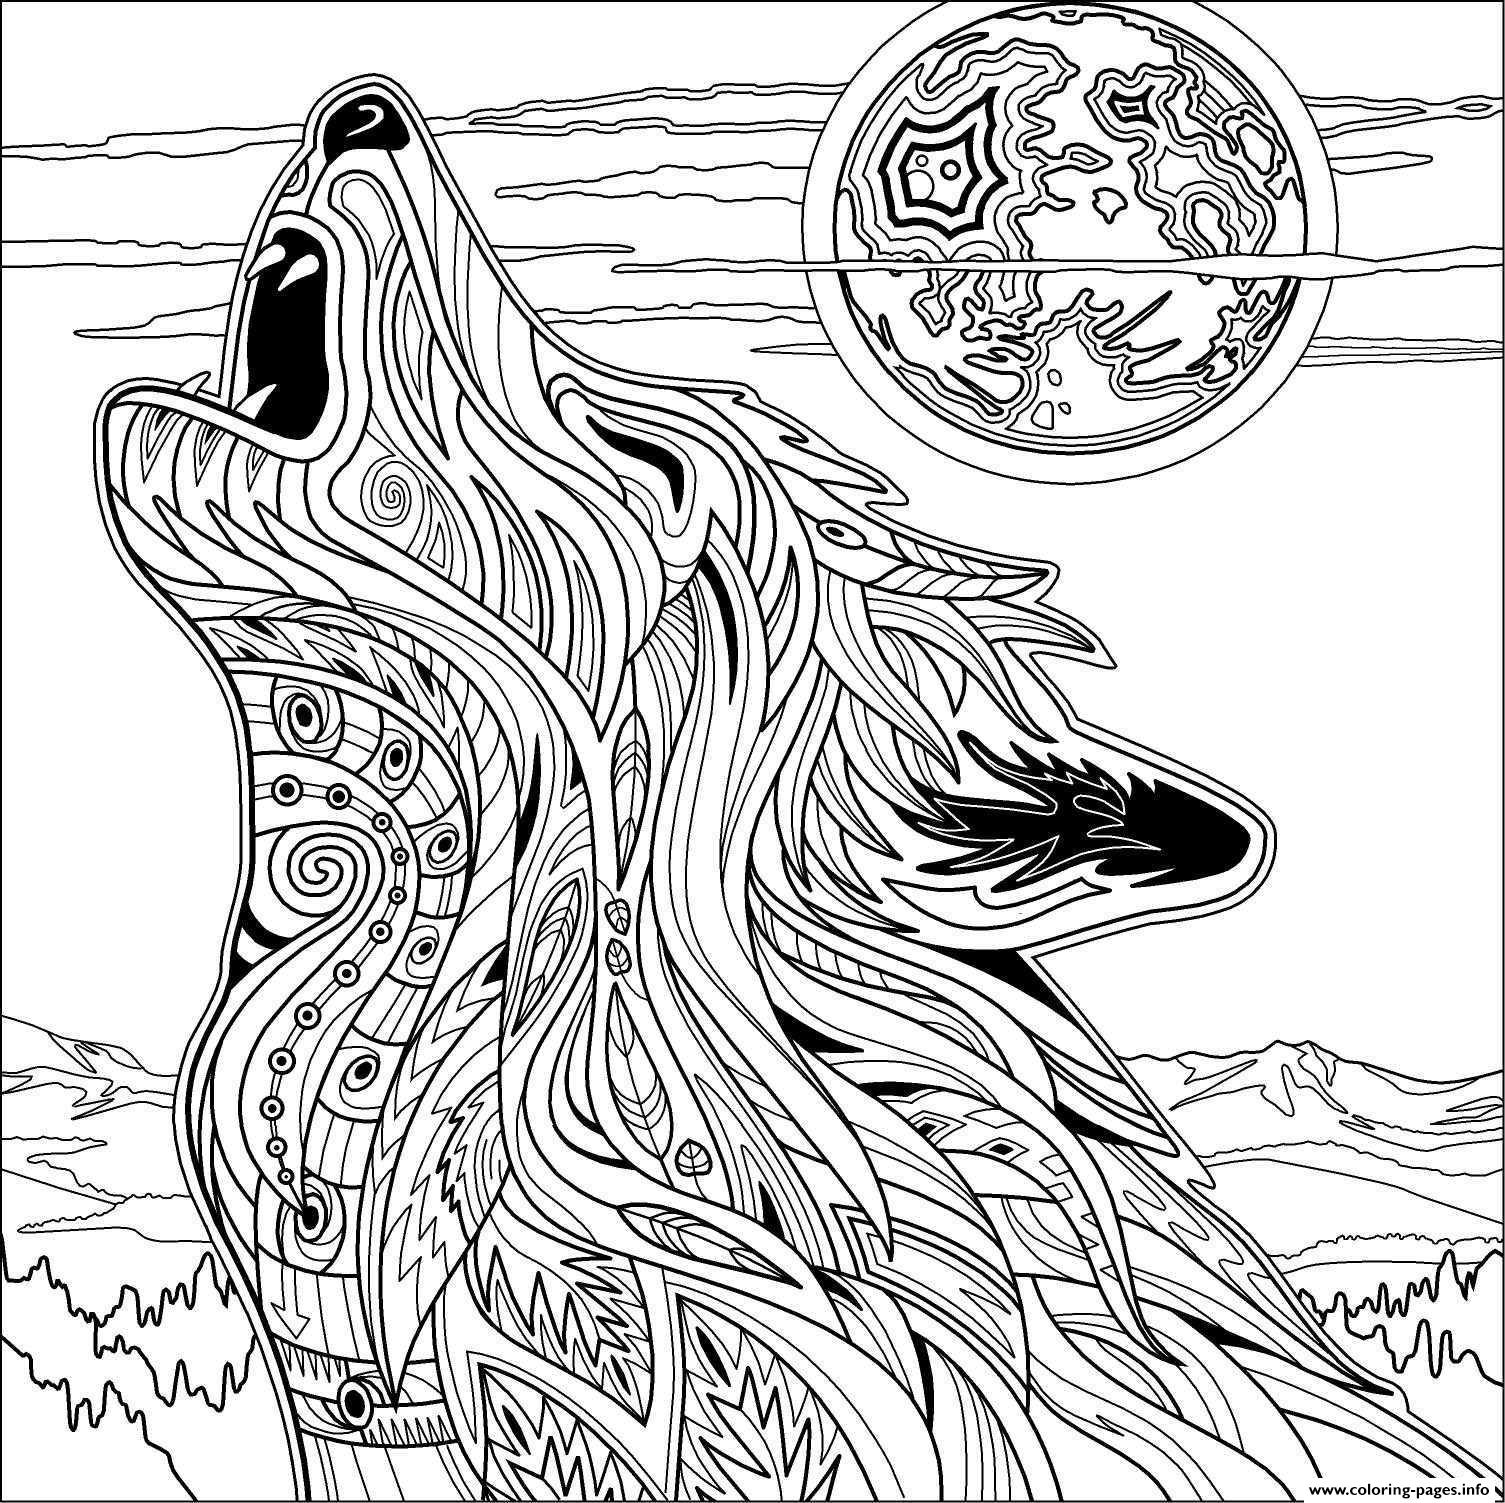 Wolf Howling Coloring Page Free Printable Coloring Pages for Kids